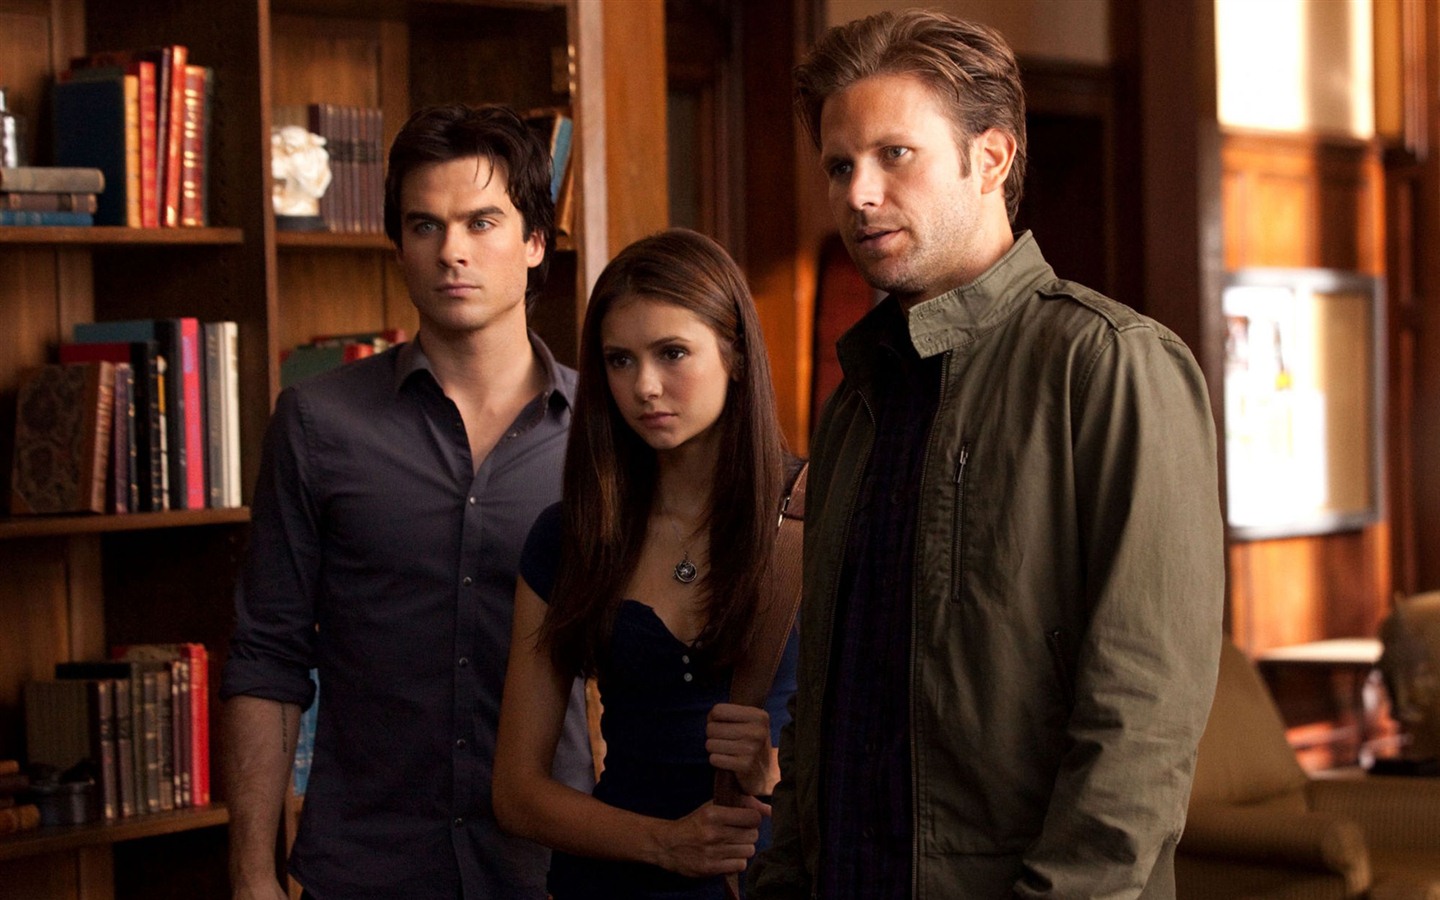 The Vampire Diaries HD Wallpapers #2 - 1440x900